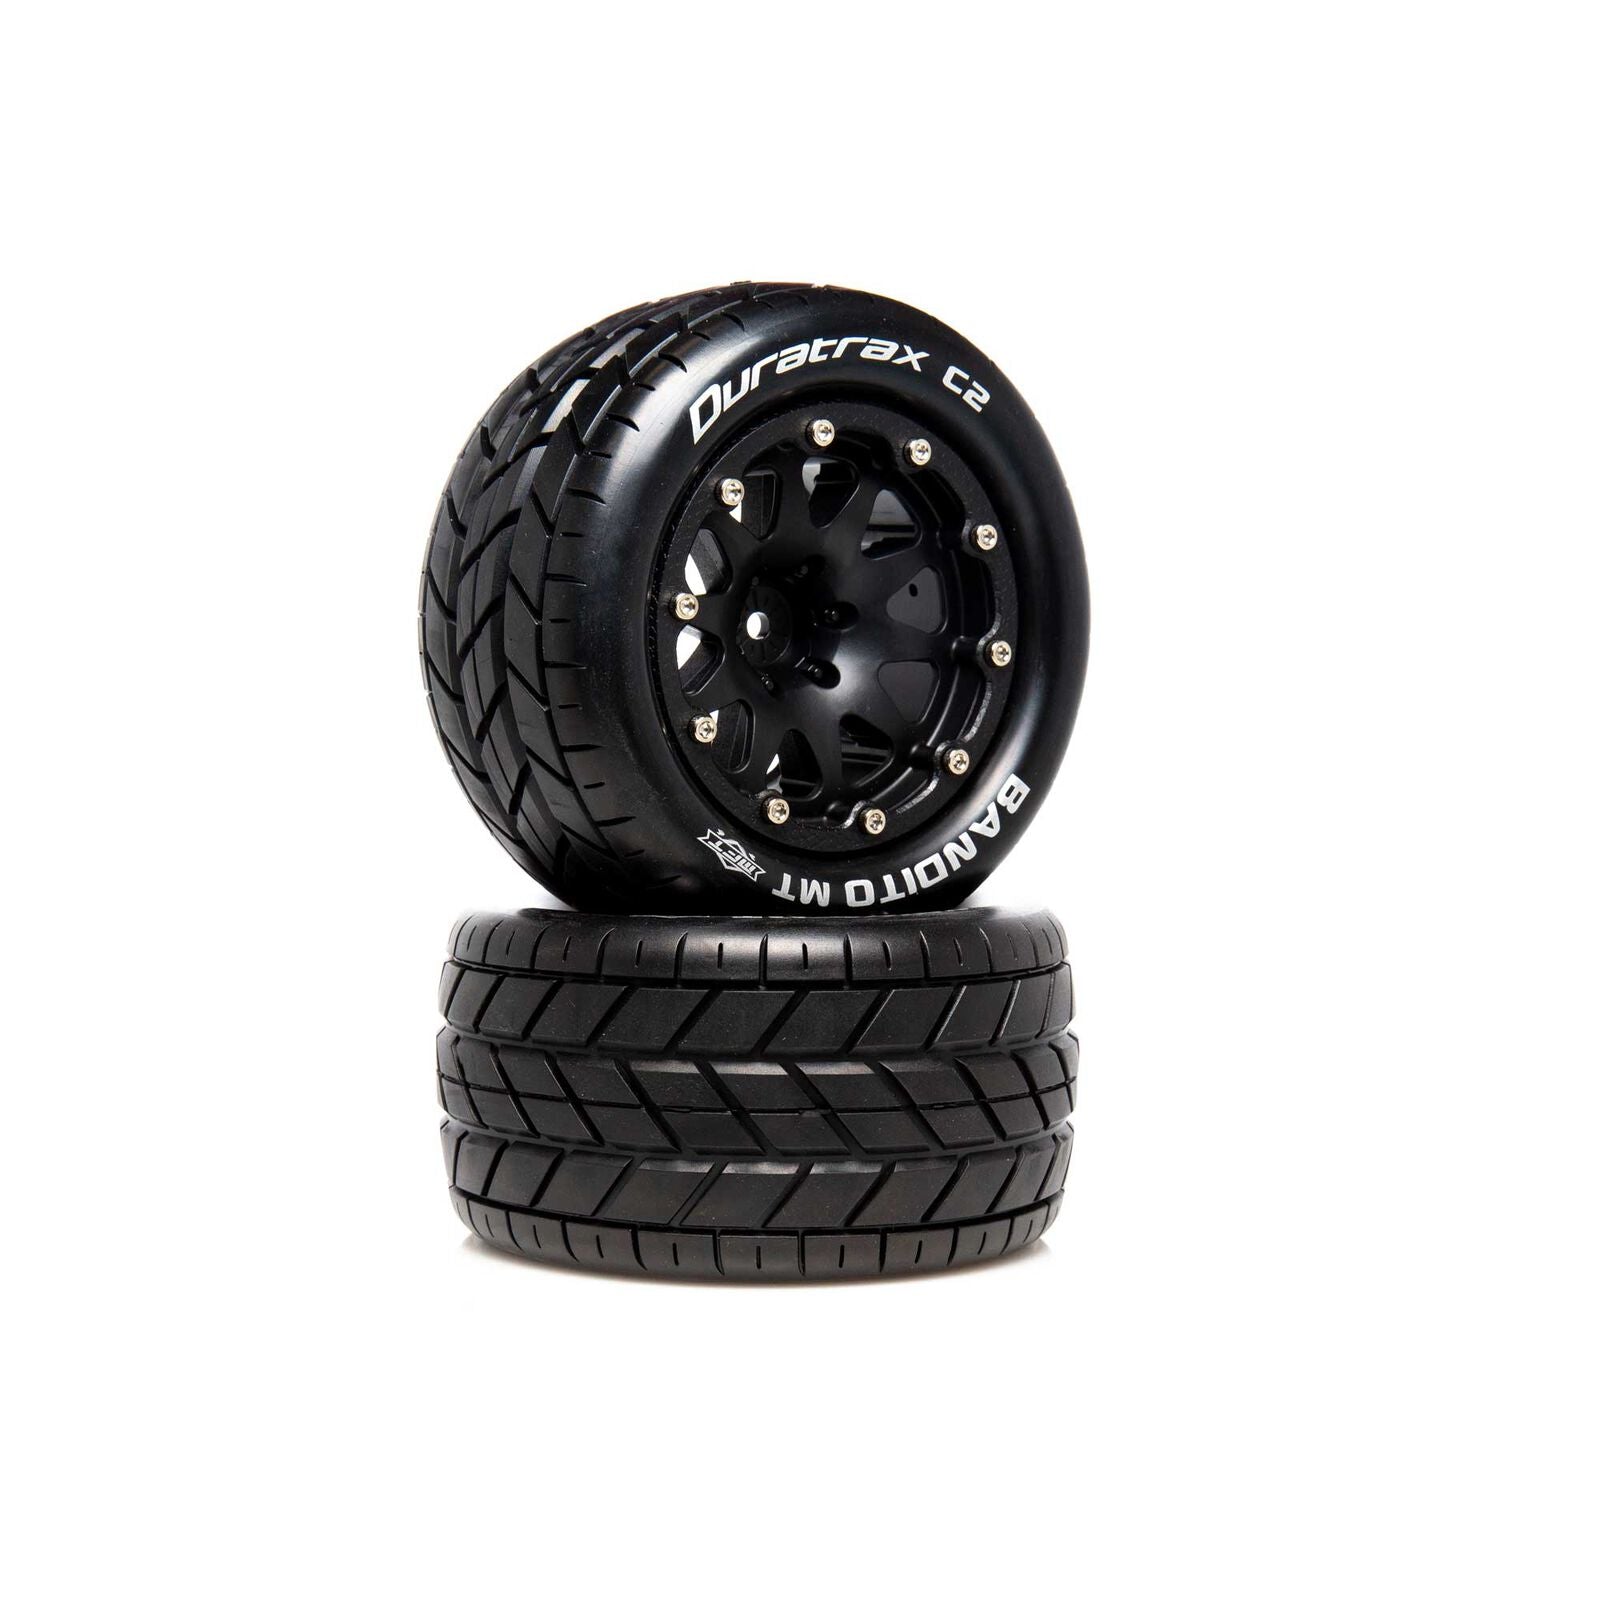 DURATRAX DTXC5516 Bandito MT Belted 2.8" 2WD Mounted Rear Tires, .5 Offset, Black (2)